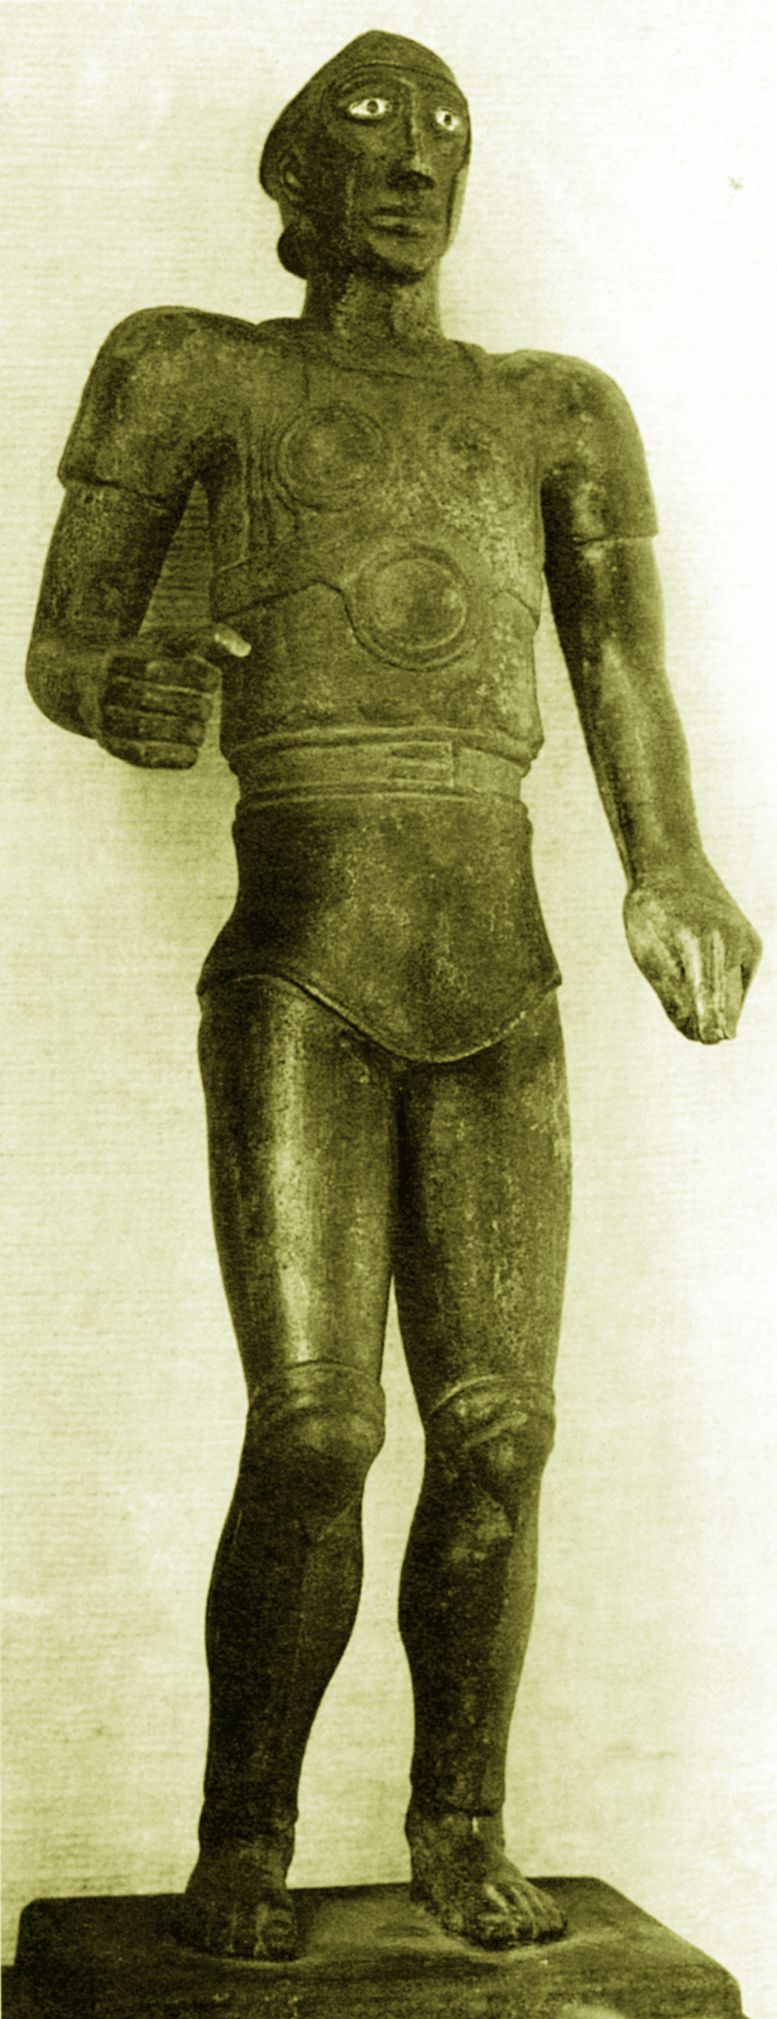 An eagle-eyed Samnite warrior in helmet and cuirass, as depicted in this 5th-century bronze statuette.